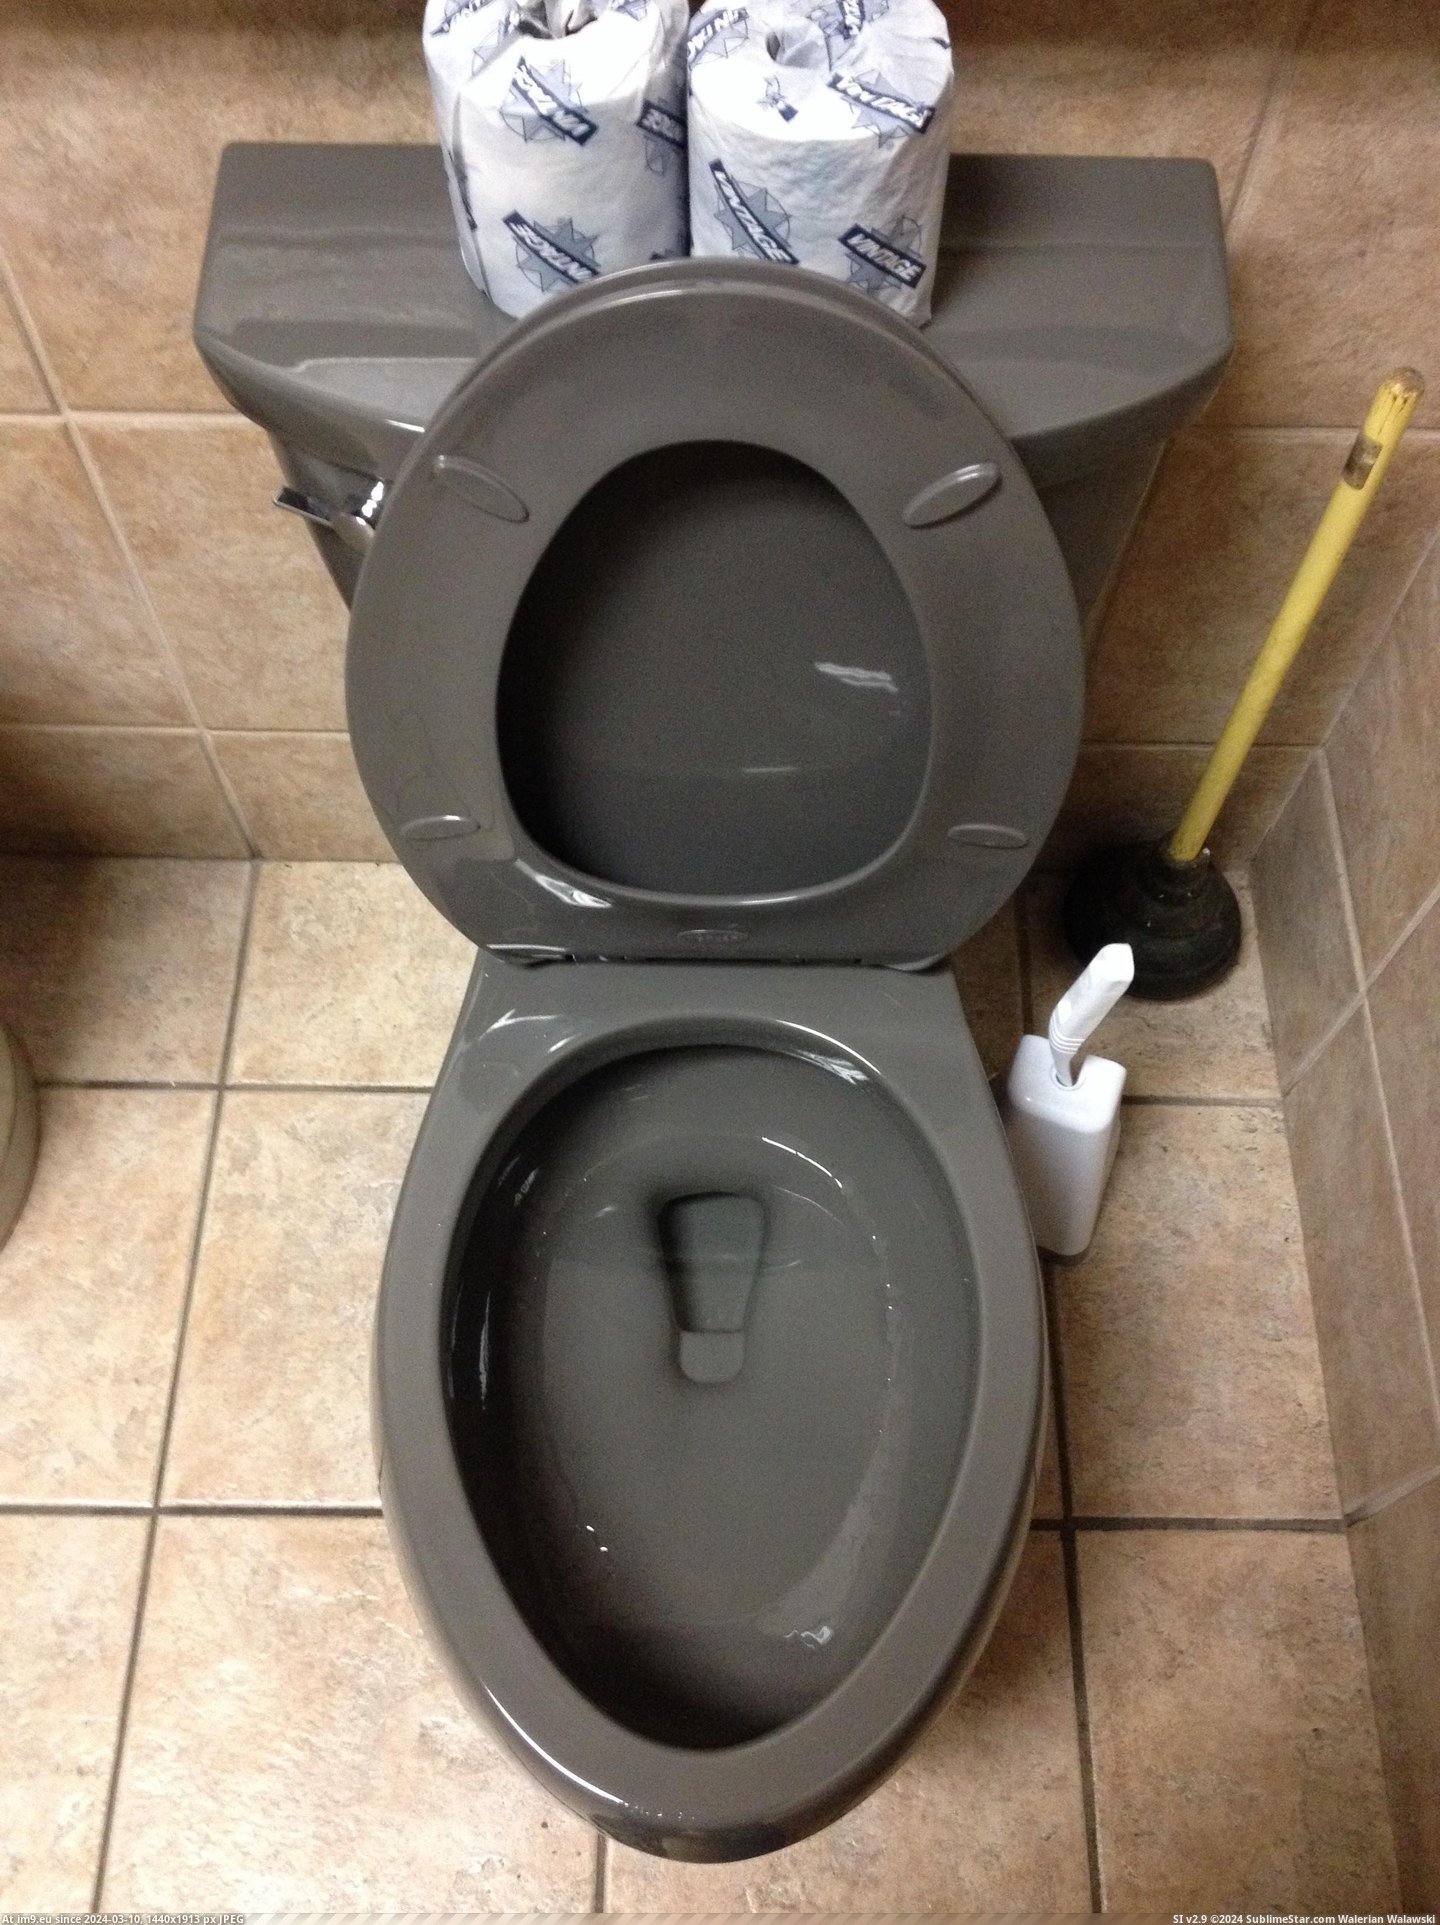 #Black #White #Toilet #Gray #Urinal #All #Bathroom [Mildlyinteresting] The toilet and urinal in the bathroom were all gray rather than just white or white and black 2 Pic. (Изображение из альбом My r/MILDLYINTERESTING favs))